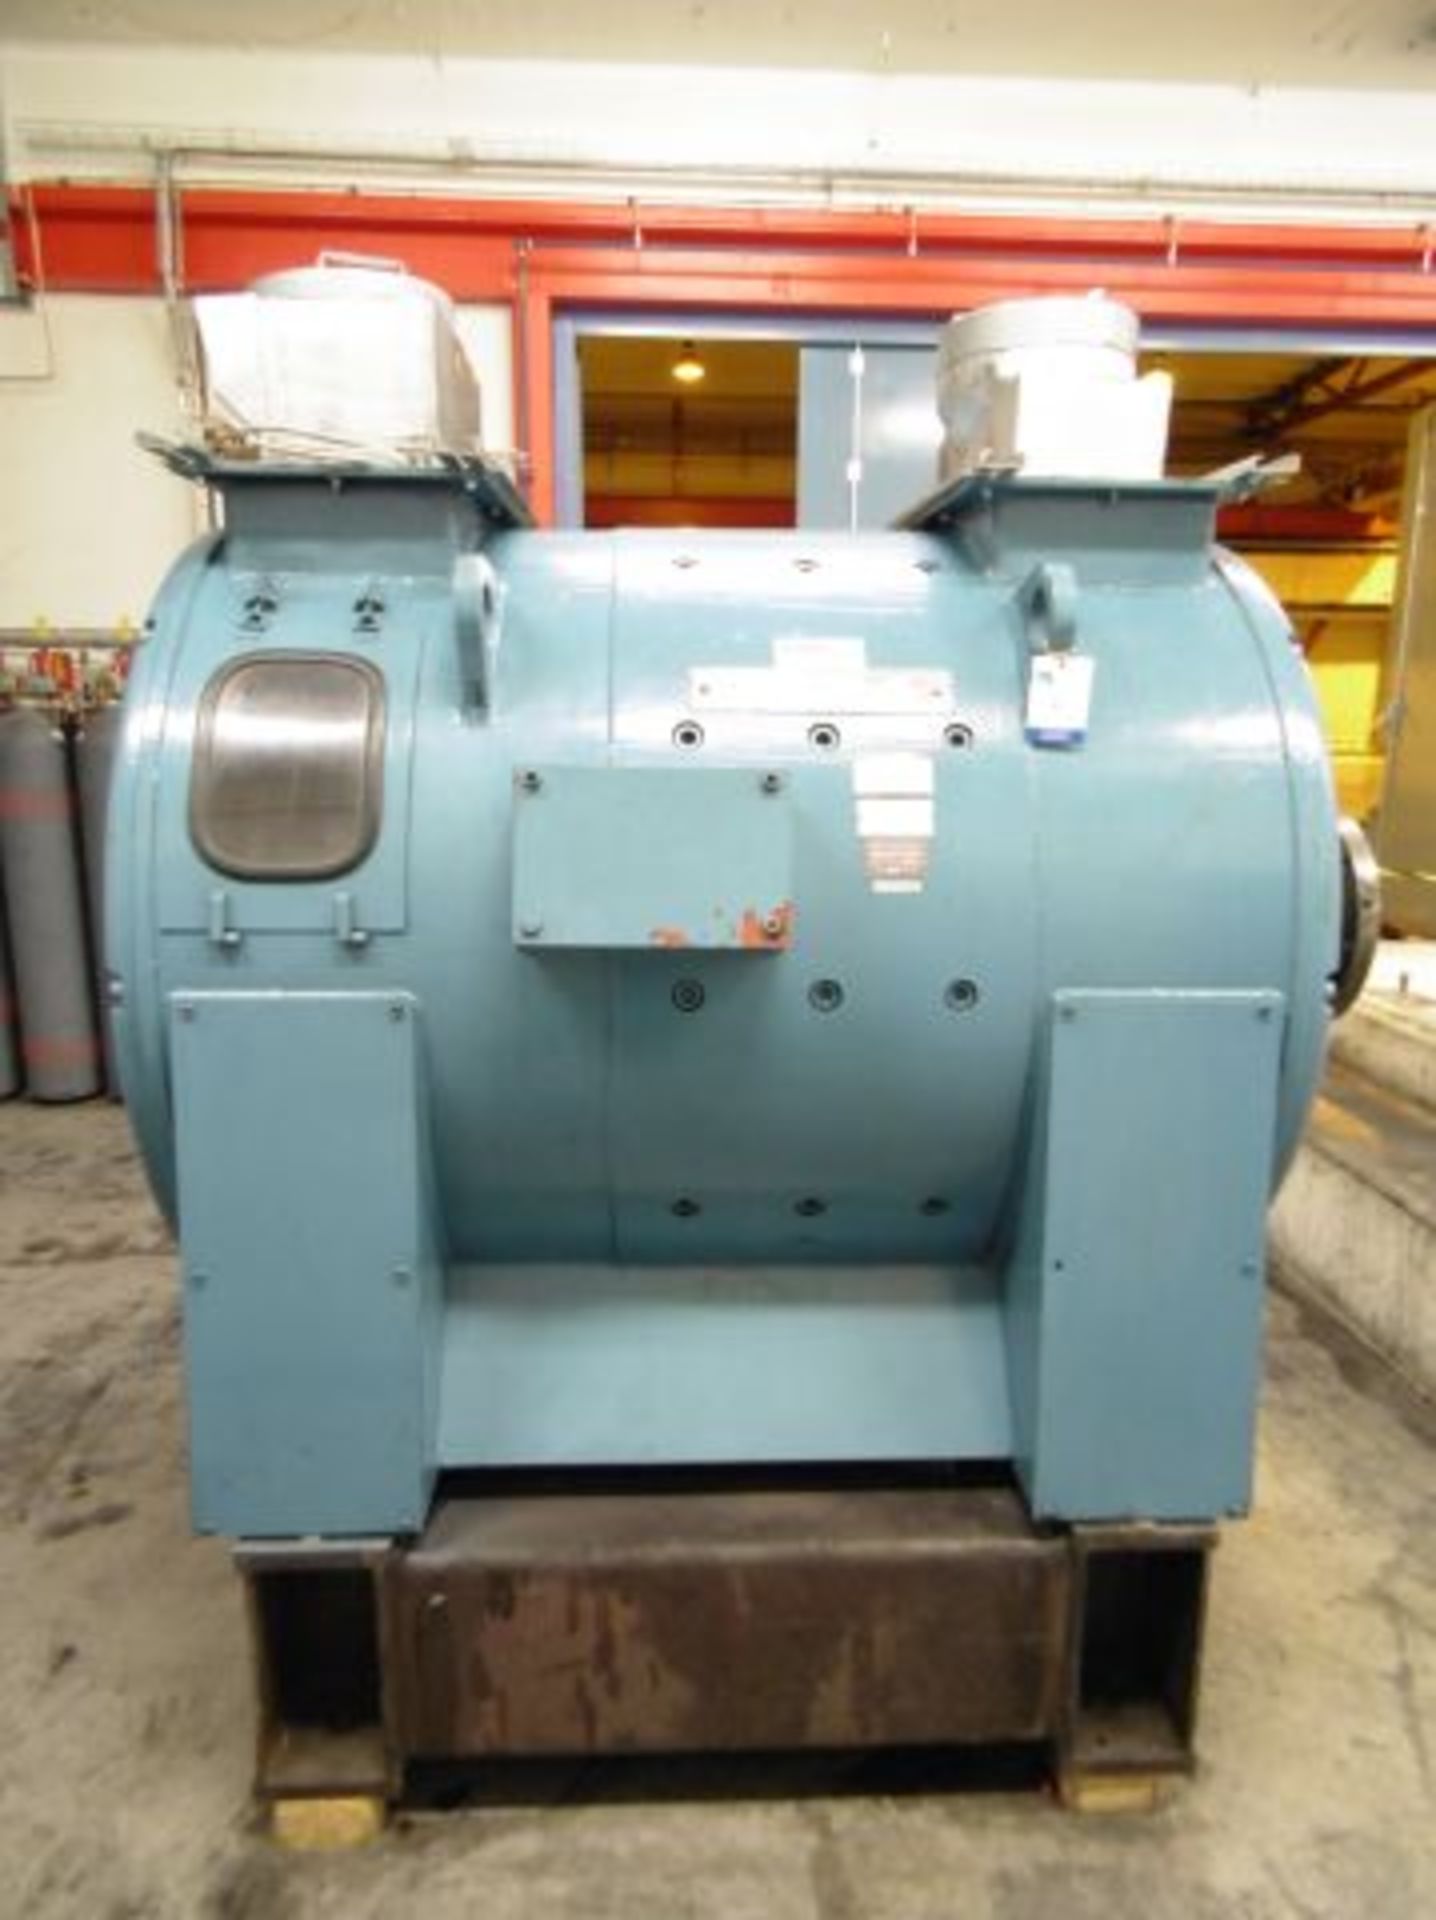 * Refurbished ASEA 620kw DC Motor.  Click here to view more information on this lot.